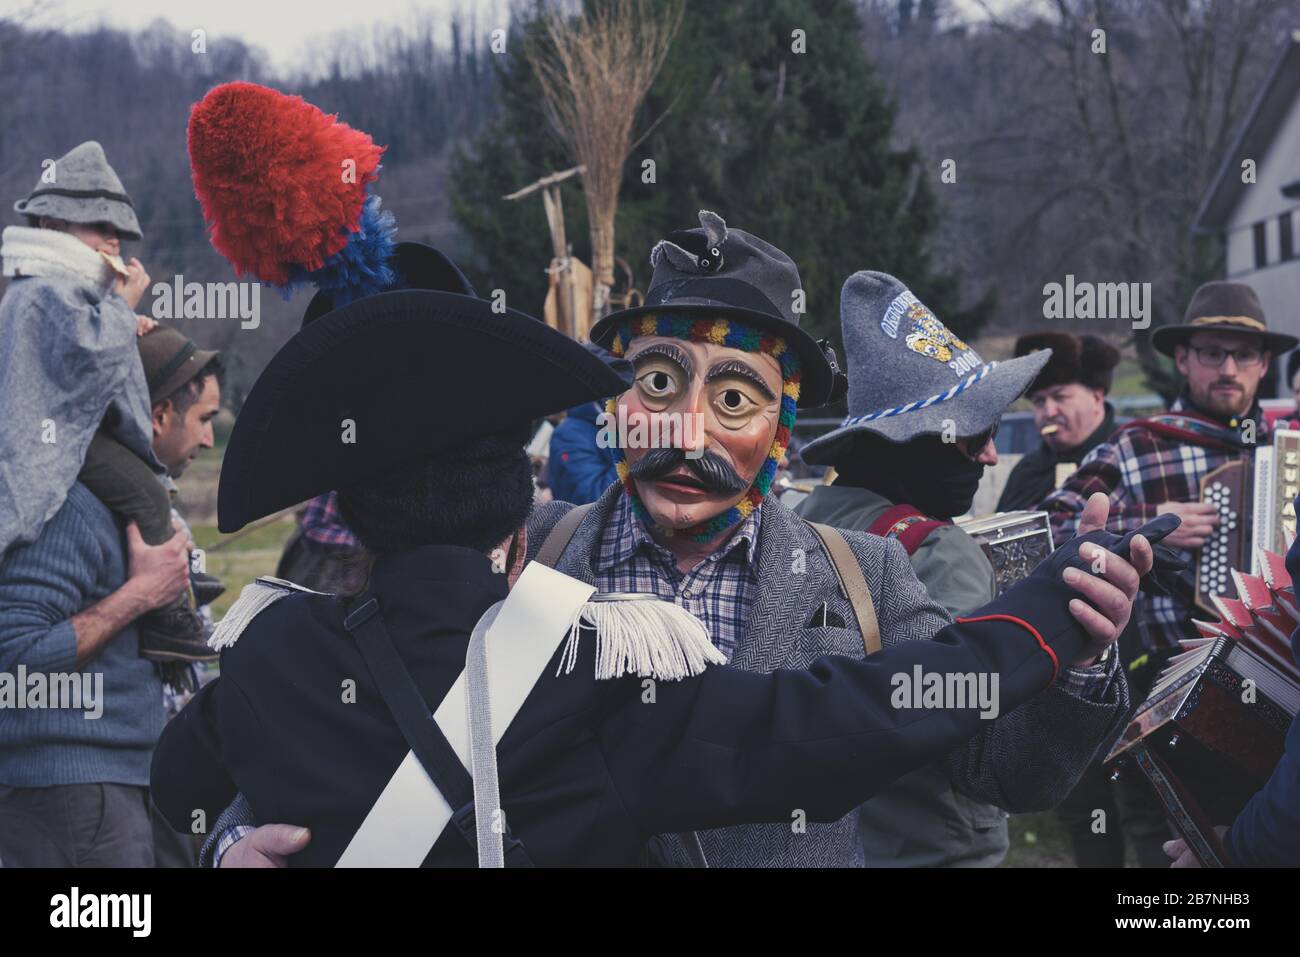 Two masked men dancing with a traditional band in background. Folk music concept. Pust carnival parade. Stock Photo